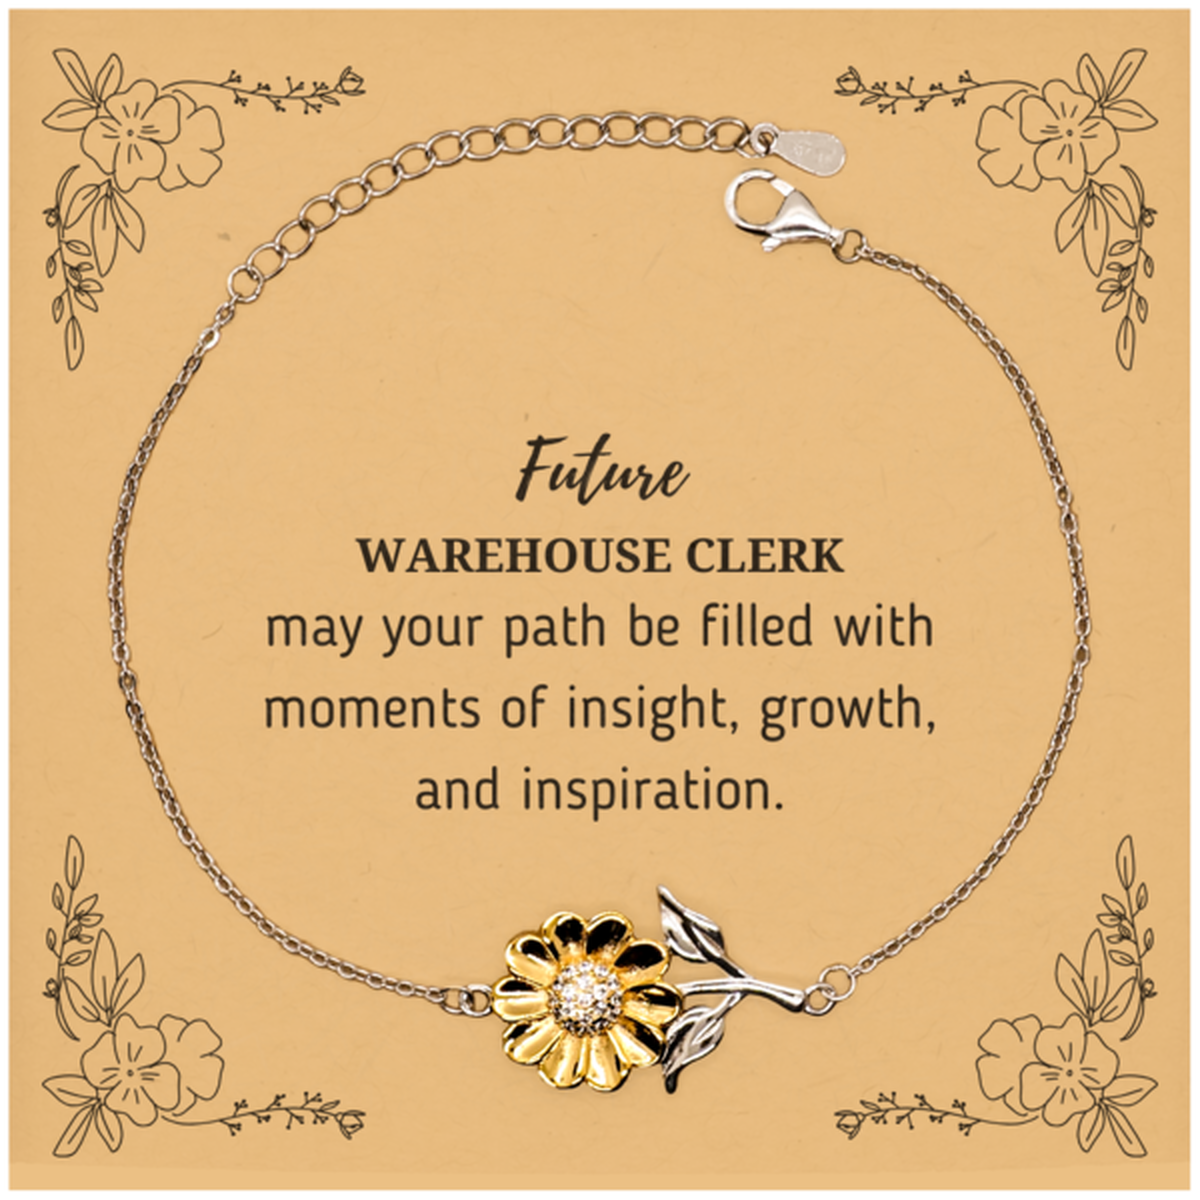 Future Warehouse Clerk Gifts, May your path be filled with moments of insight, Graduation Gifts for New Warehouse Clerk, Christmas Unique Sunflower Bracelet For Men, Women, Friends